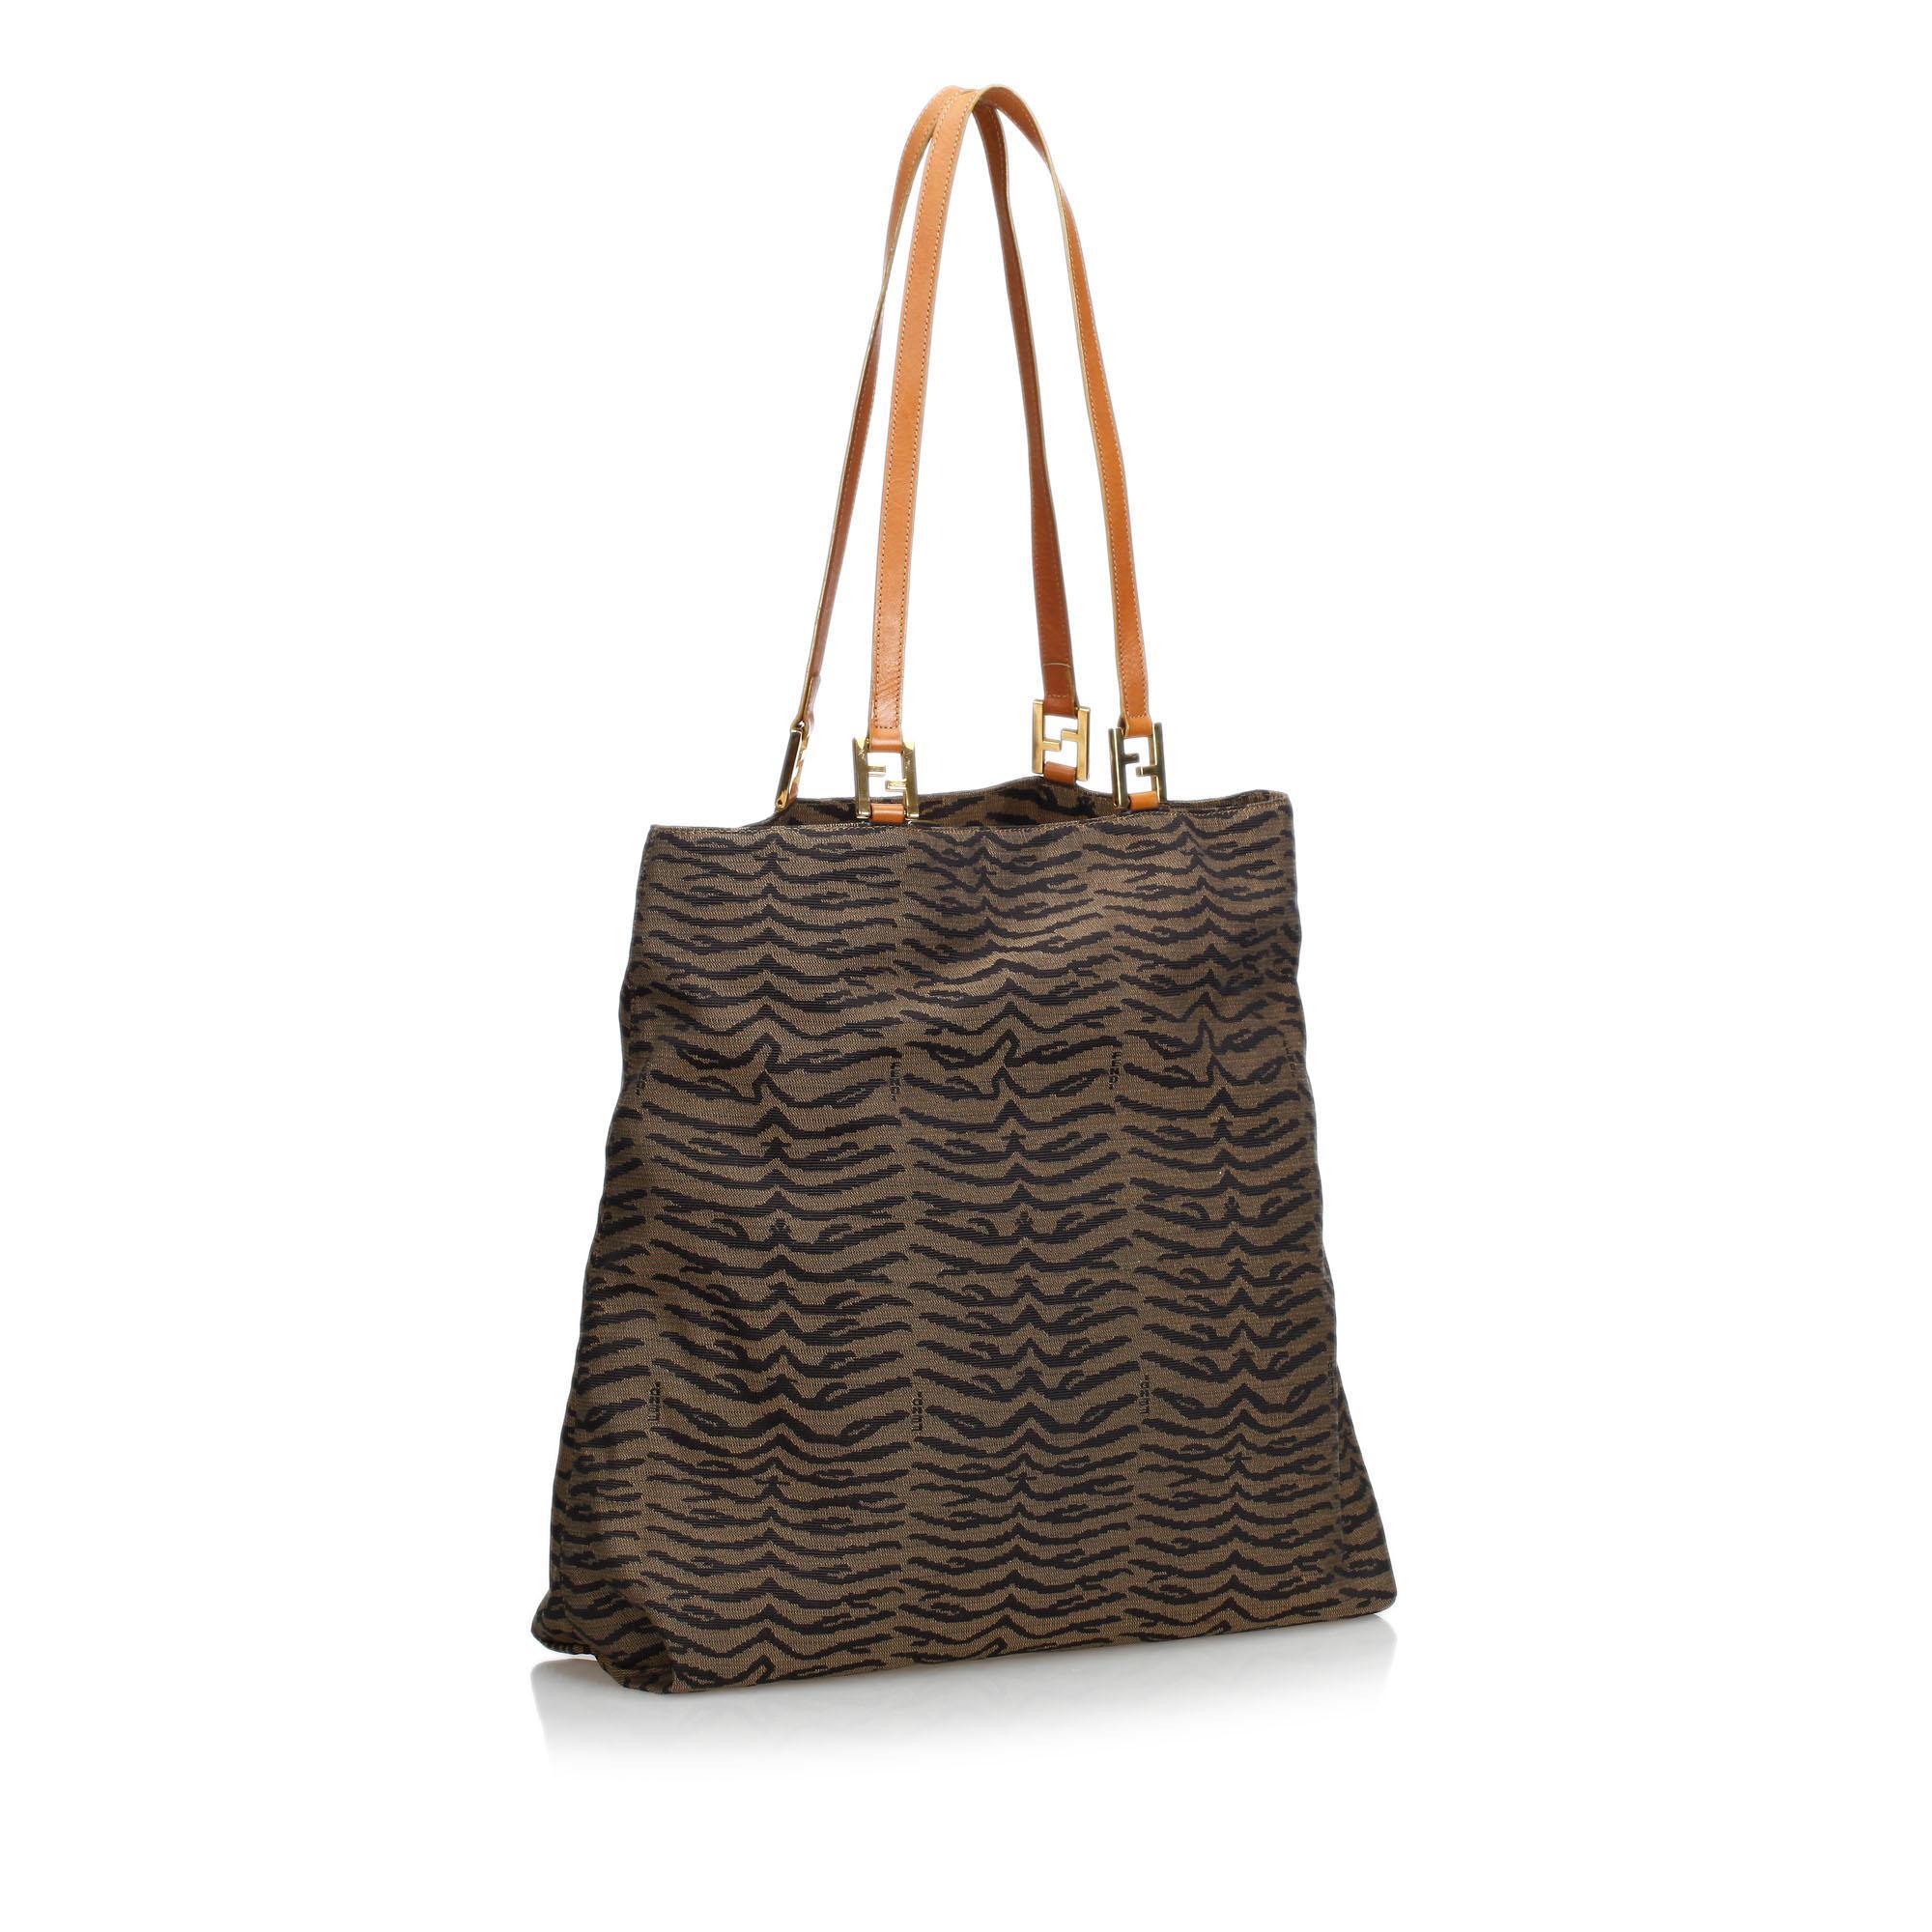 This tote features a printed jacquard body, flat leather straps, an open top with a magnetic closure, and an interior zip pocket. It carries as AB condition rating.

Inclusions: 
This item does not come with inclusions.

Dimensions:
Length: 44.00